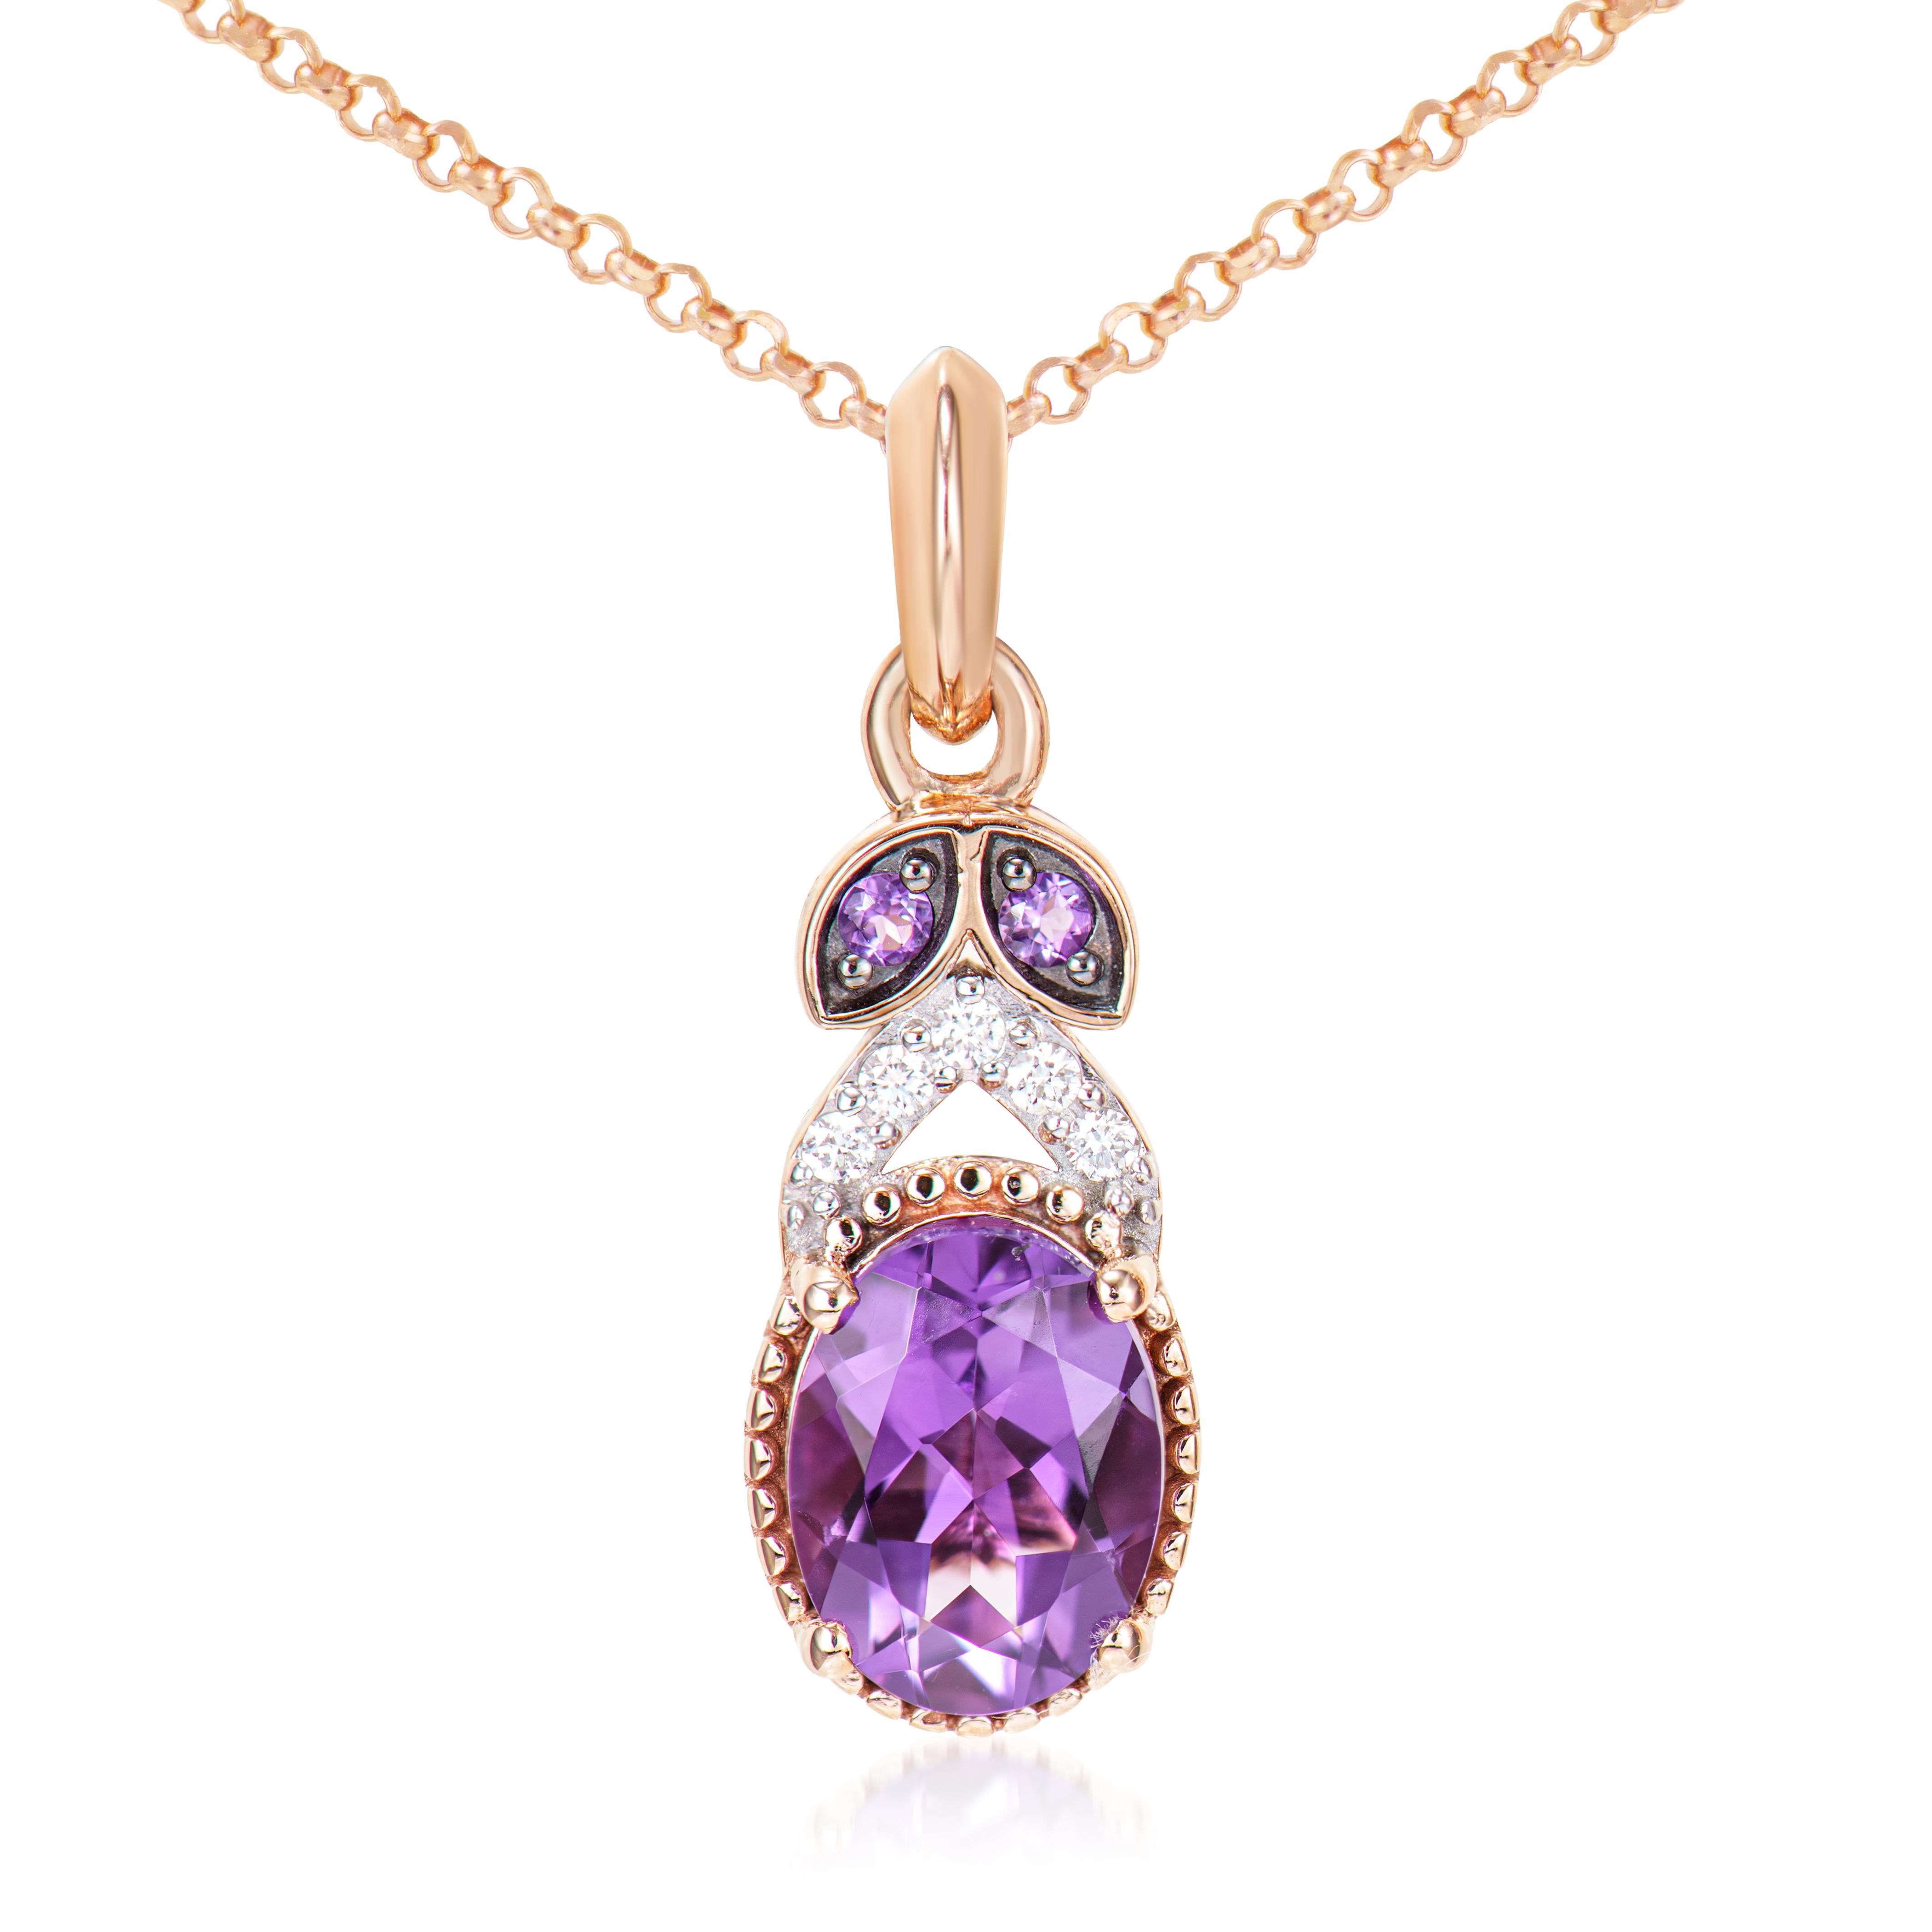 Contemporary 1.02 Carat Amethyst Pendant in 14Karat Rose Gold with White Diamond. For Sale